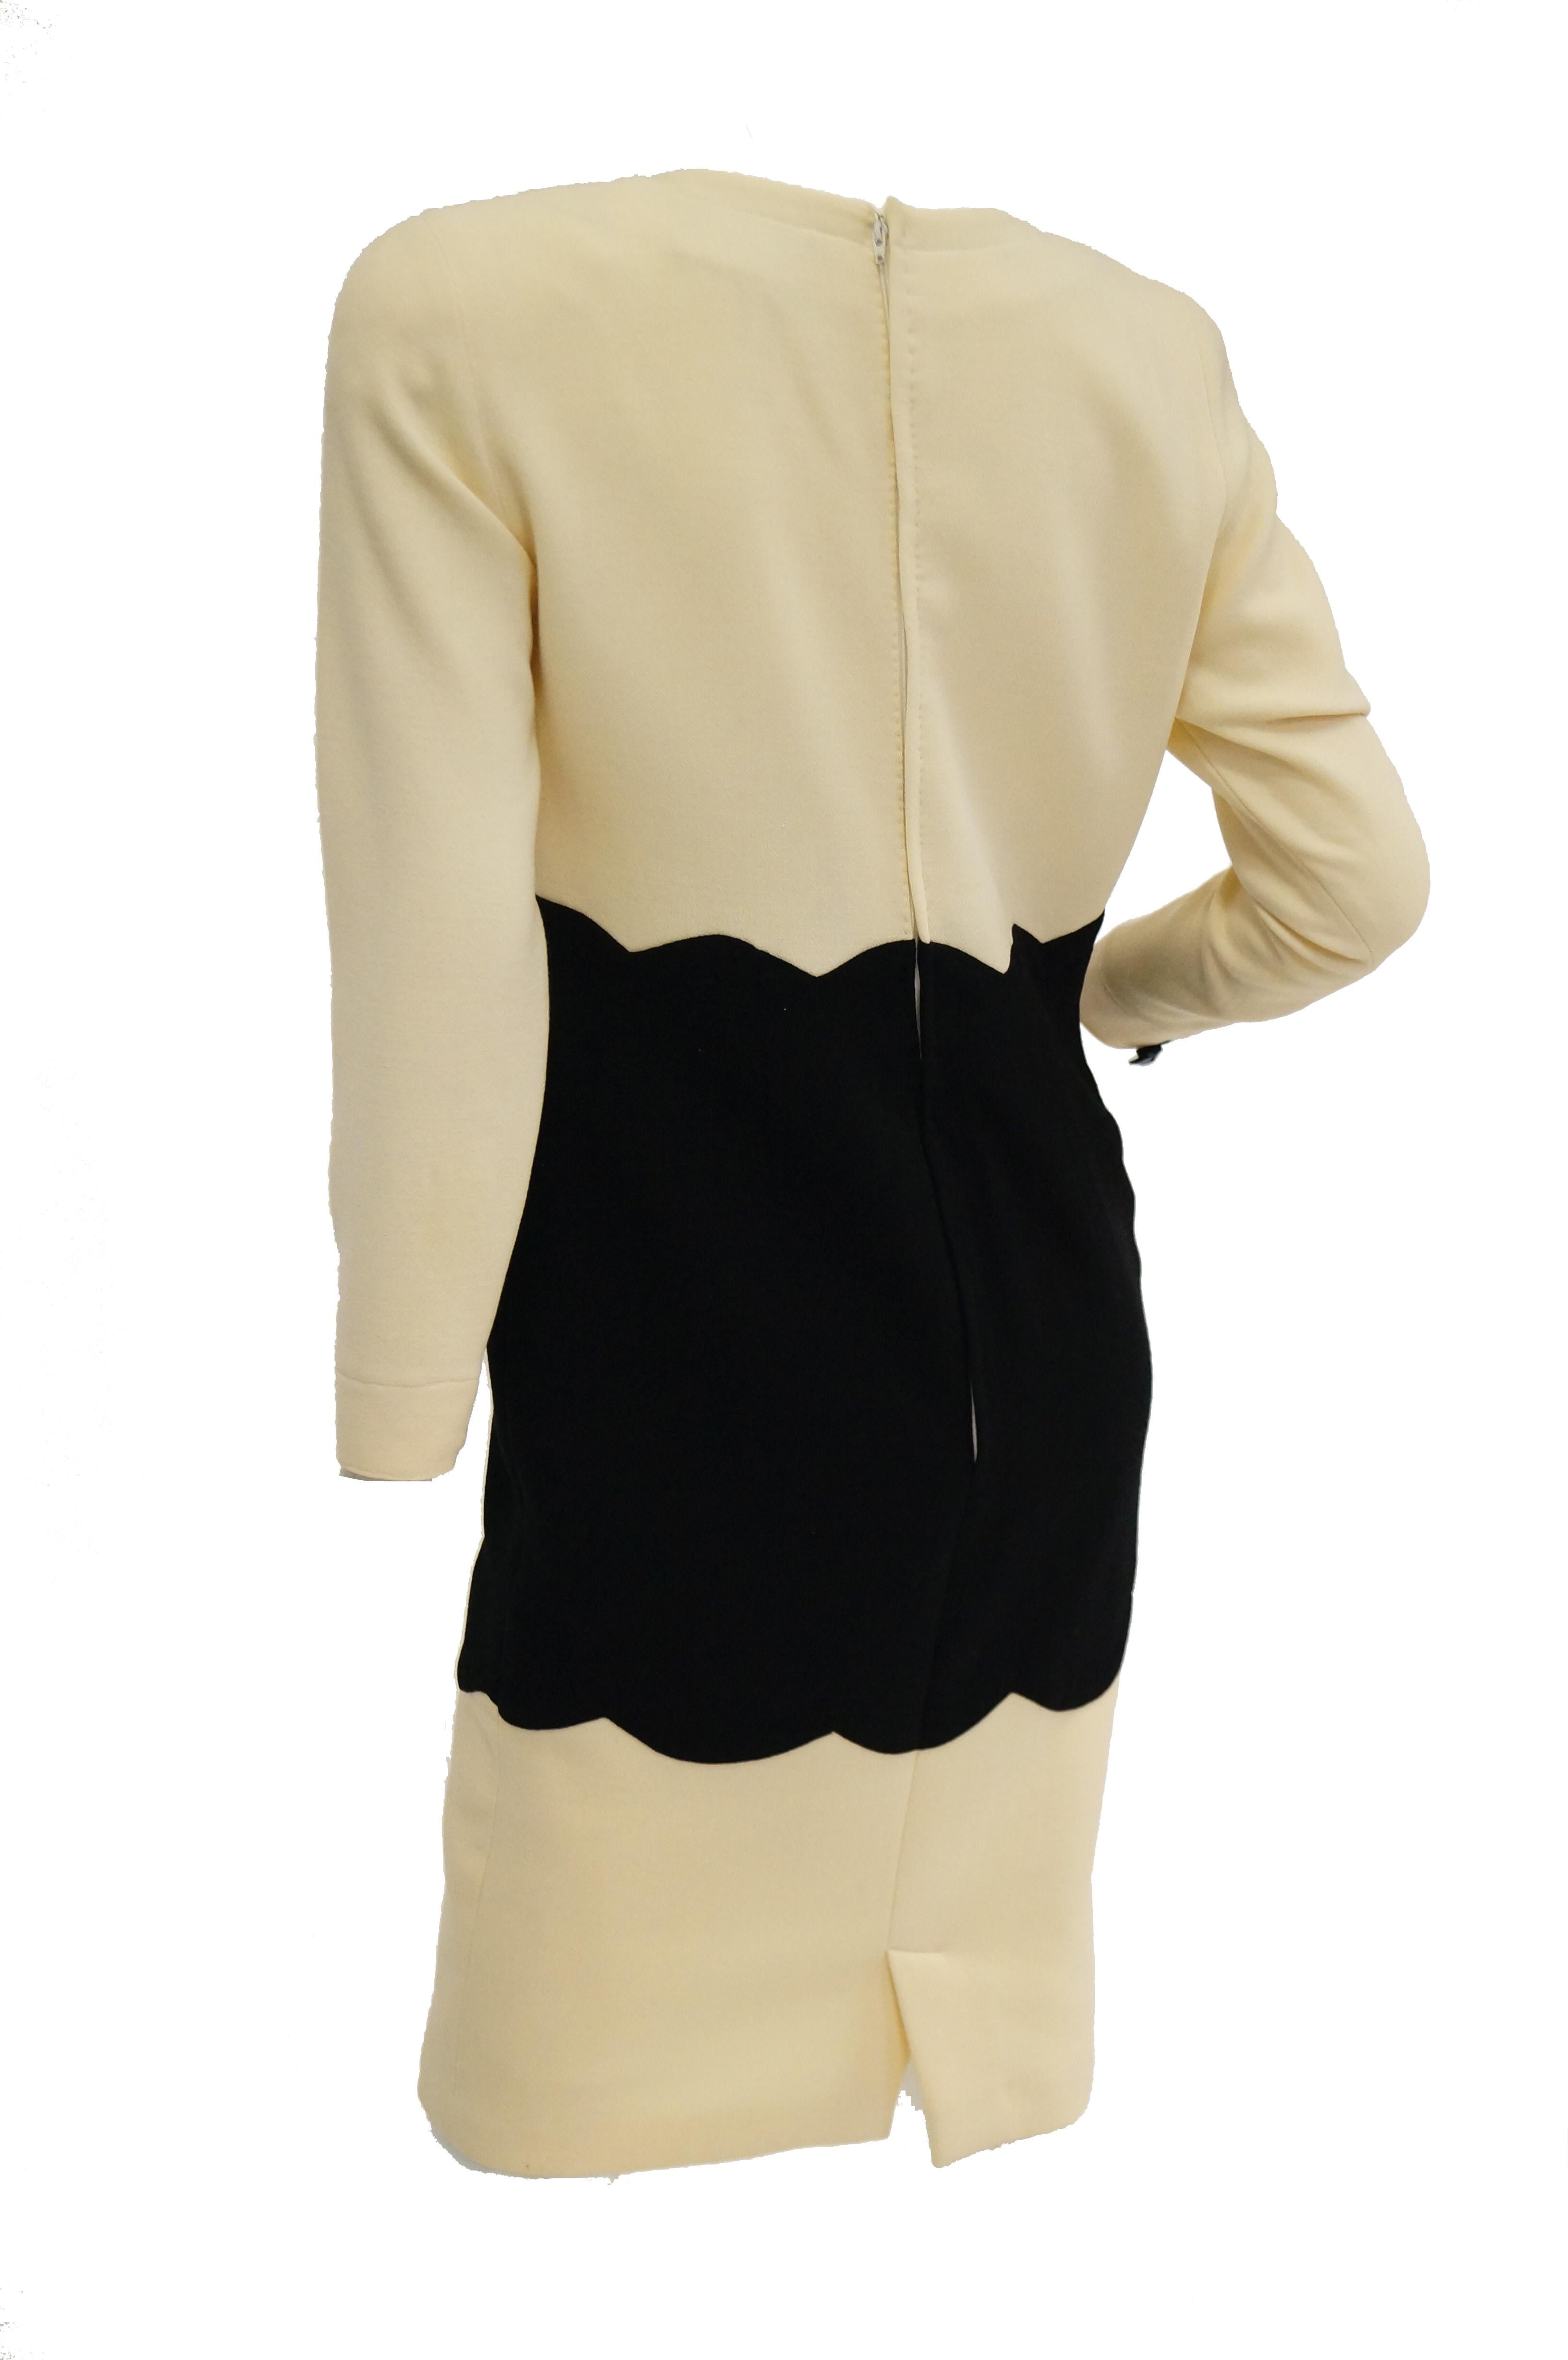 1980s Fontana Couture for Amen Wardy Cream and Black Scallop Suit Dress 1